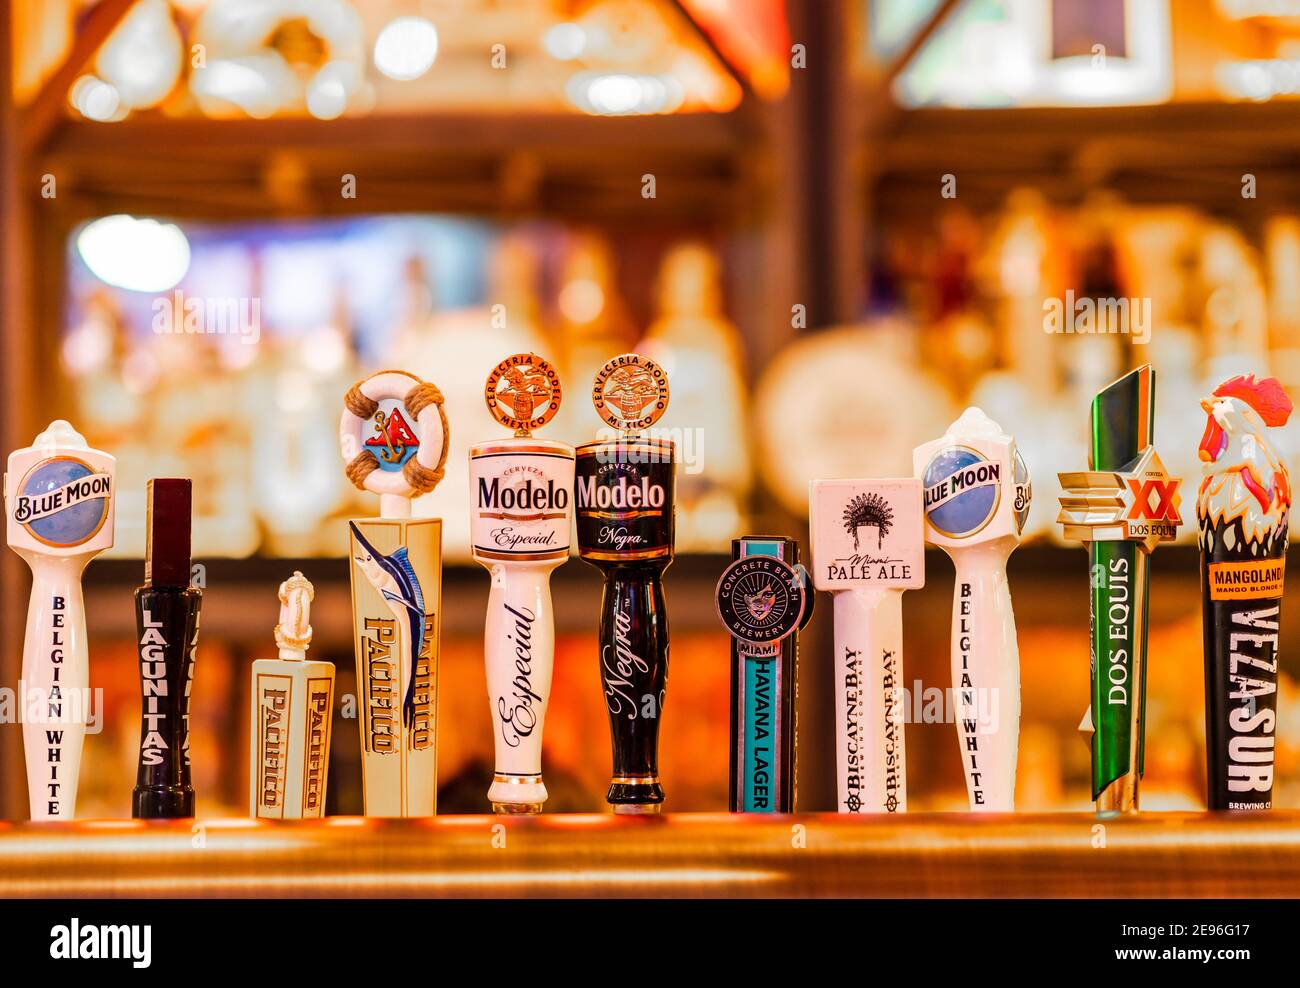 Miami, Florida - December 31, 2020: A Beer Tap With an Assortment of Imported and Exported Beers. Stock Photo